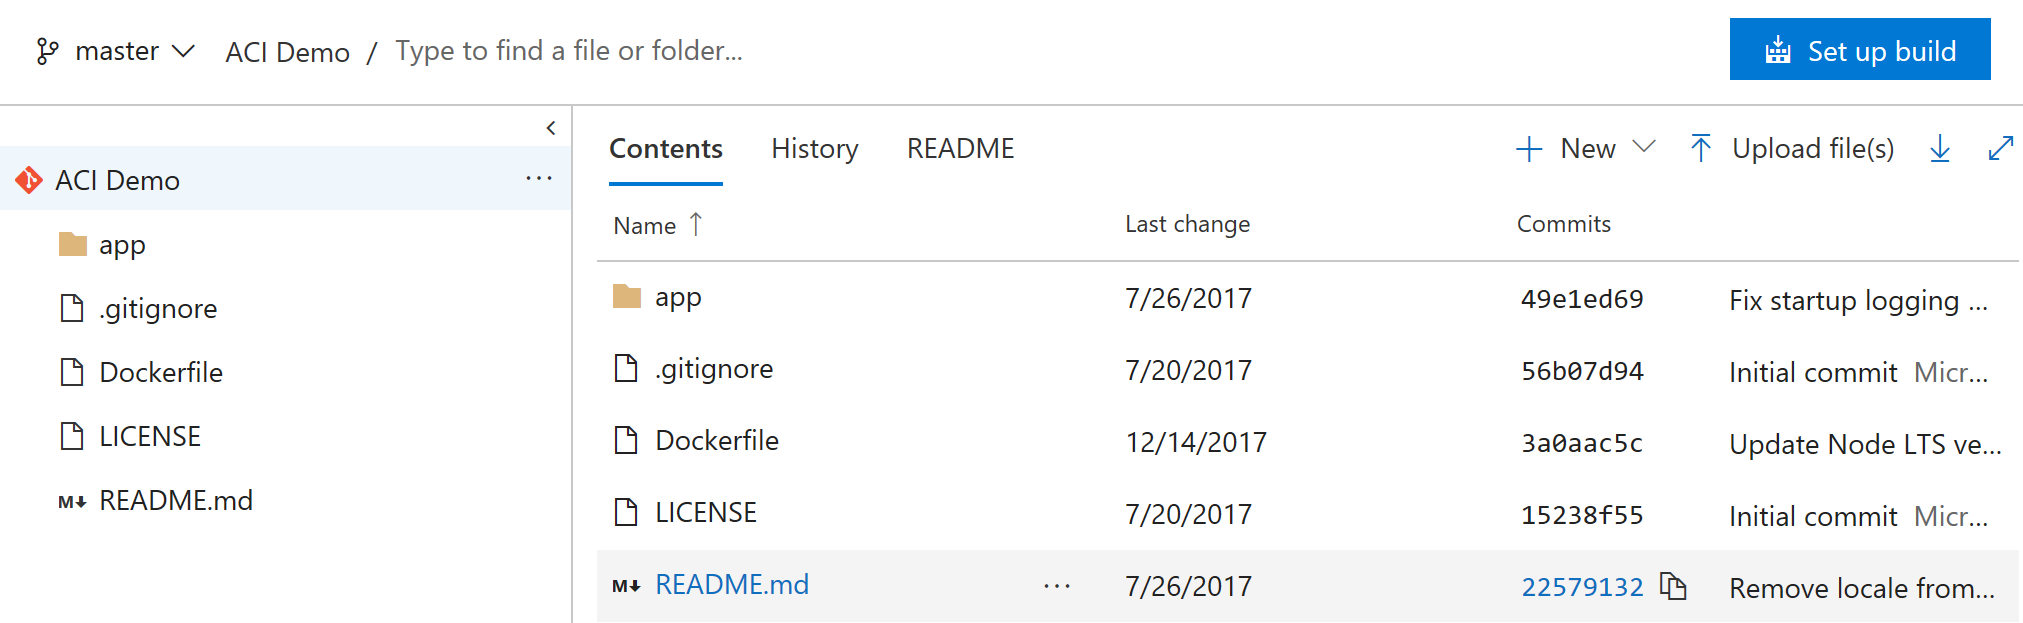 VSTS: New Repository